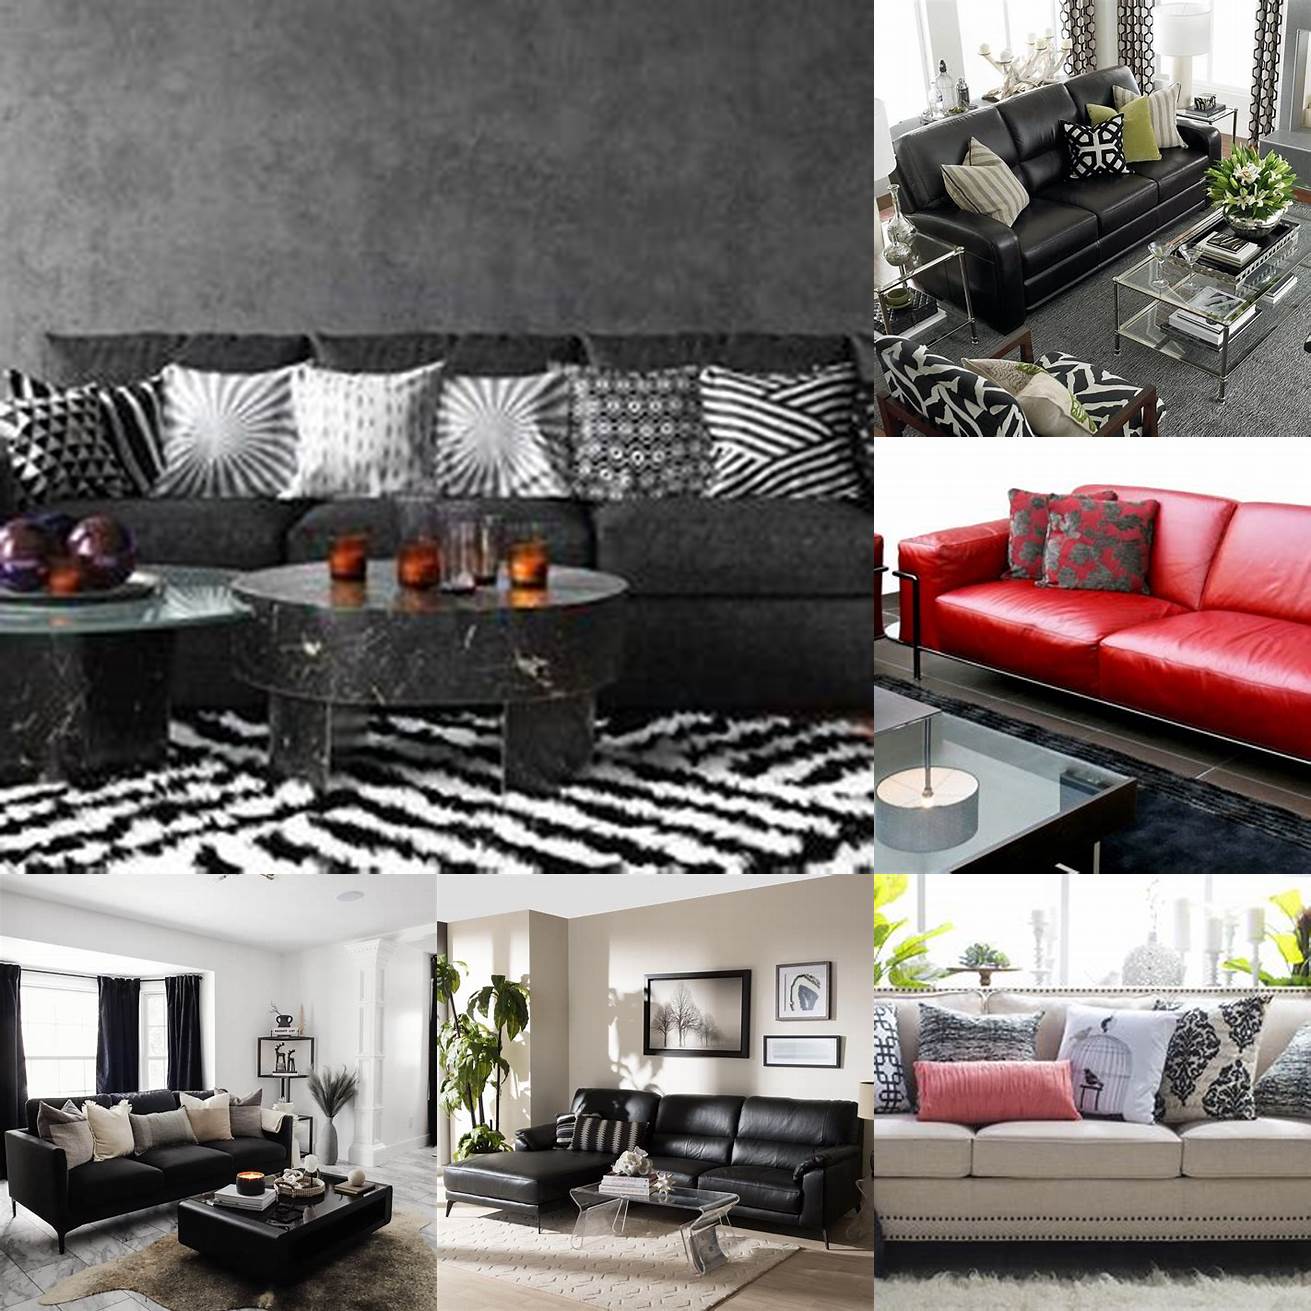 Red and black accent pillows on a black leather sofa